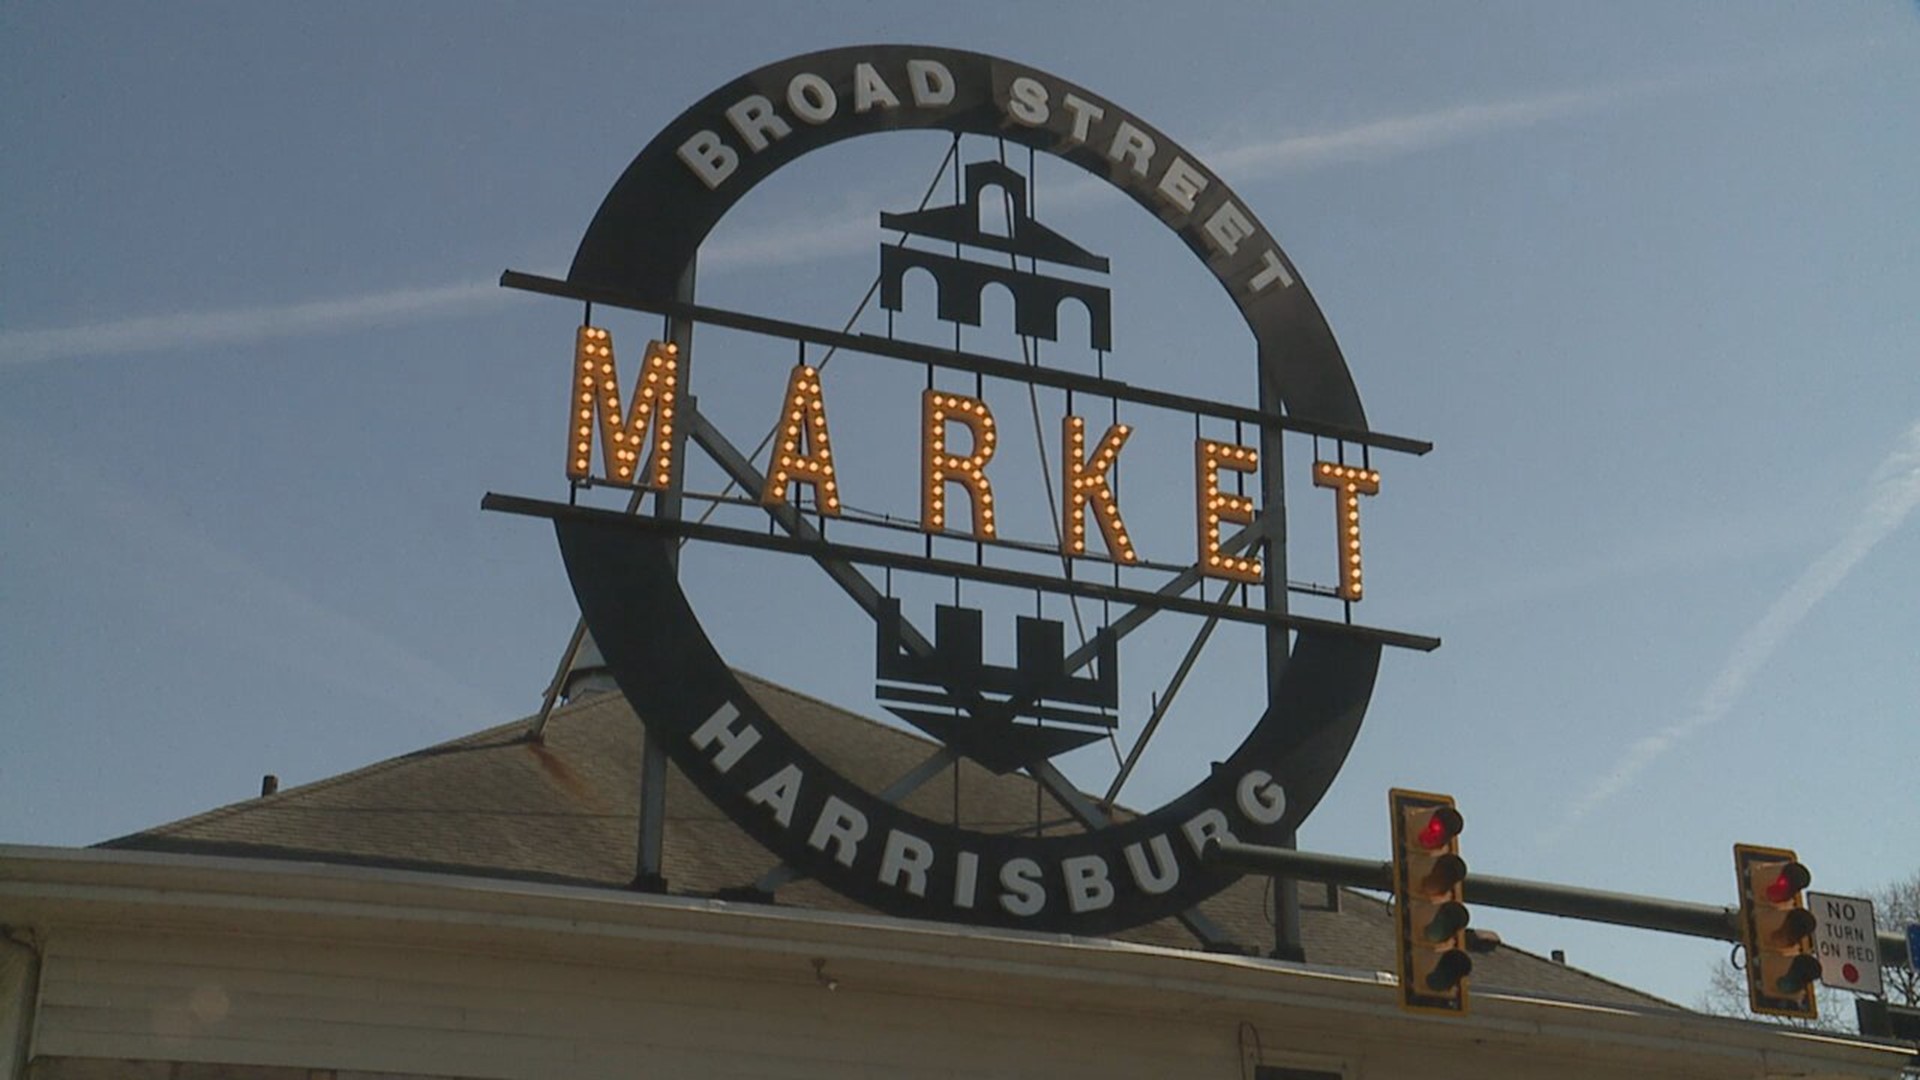 Harrisburg-area-based McClure Company has donated its plumbing service to the Broad Street Market to get temporary a tent up and running.